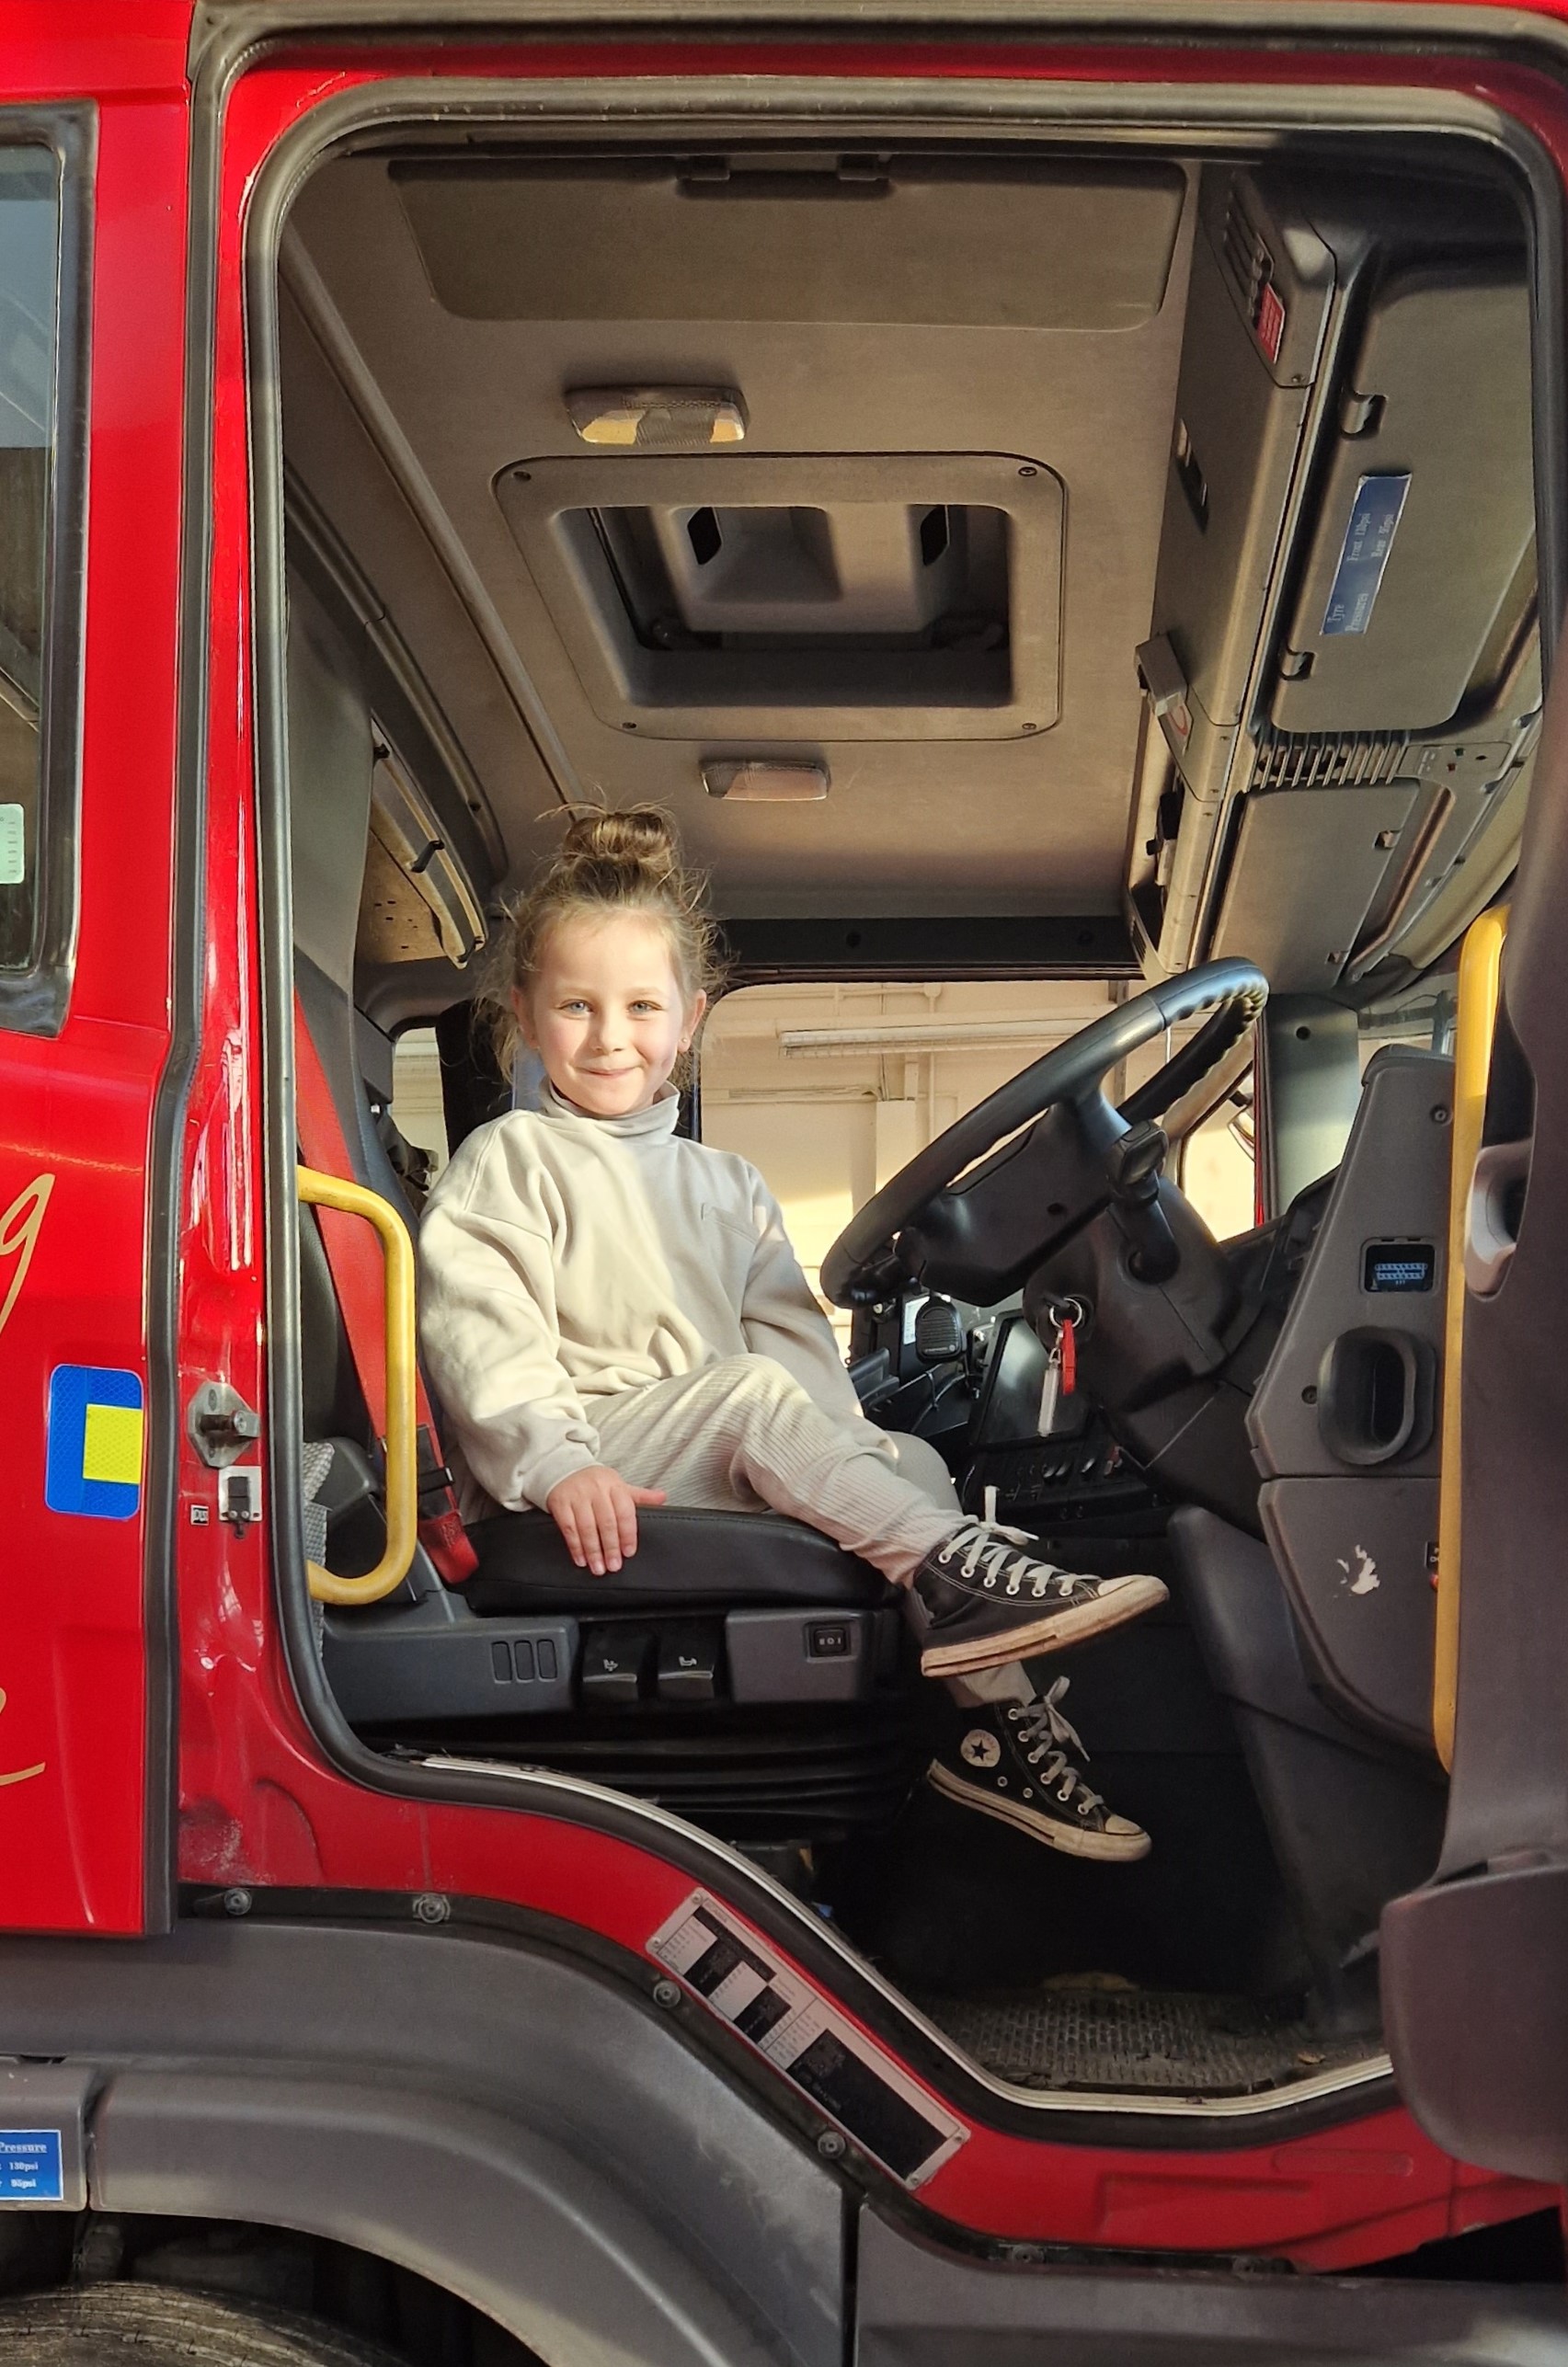 A smiling young girl looks down from the driver's seat of a fire engine